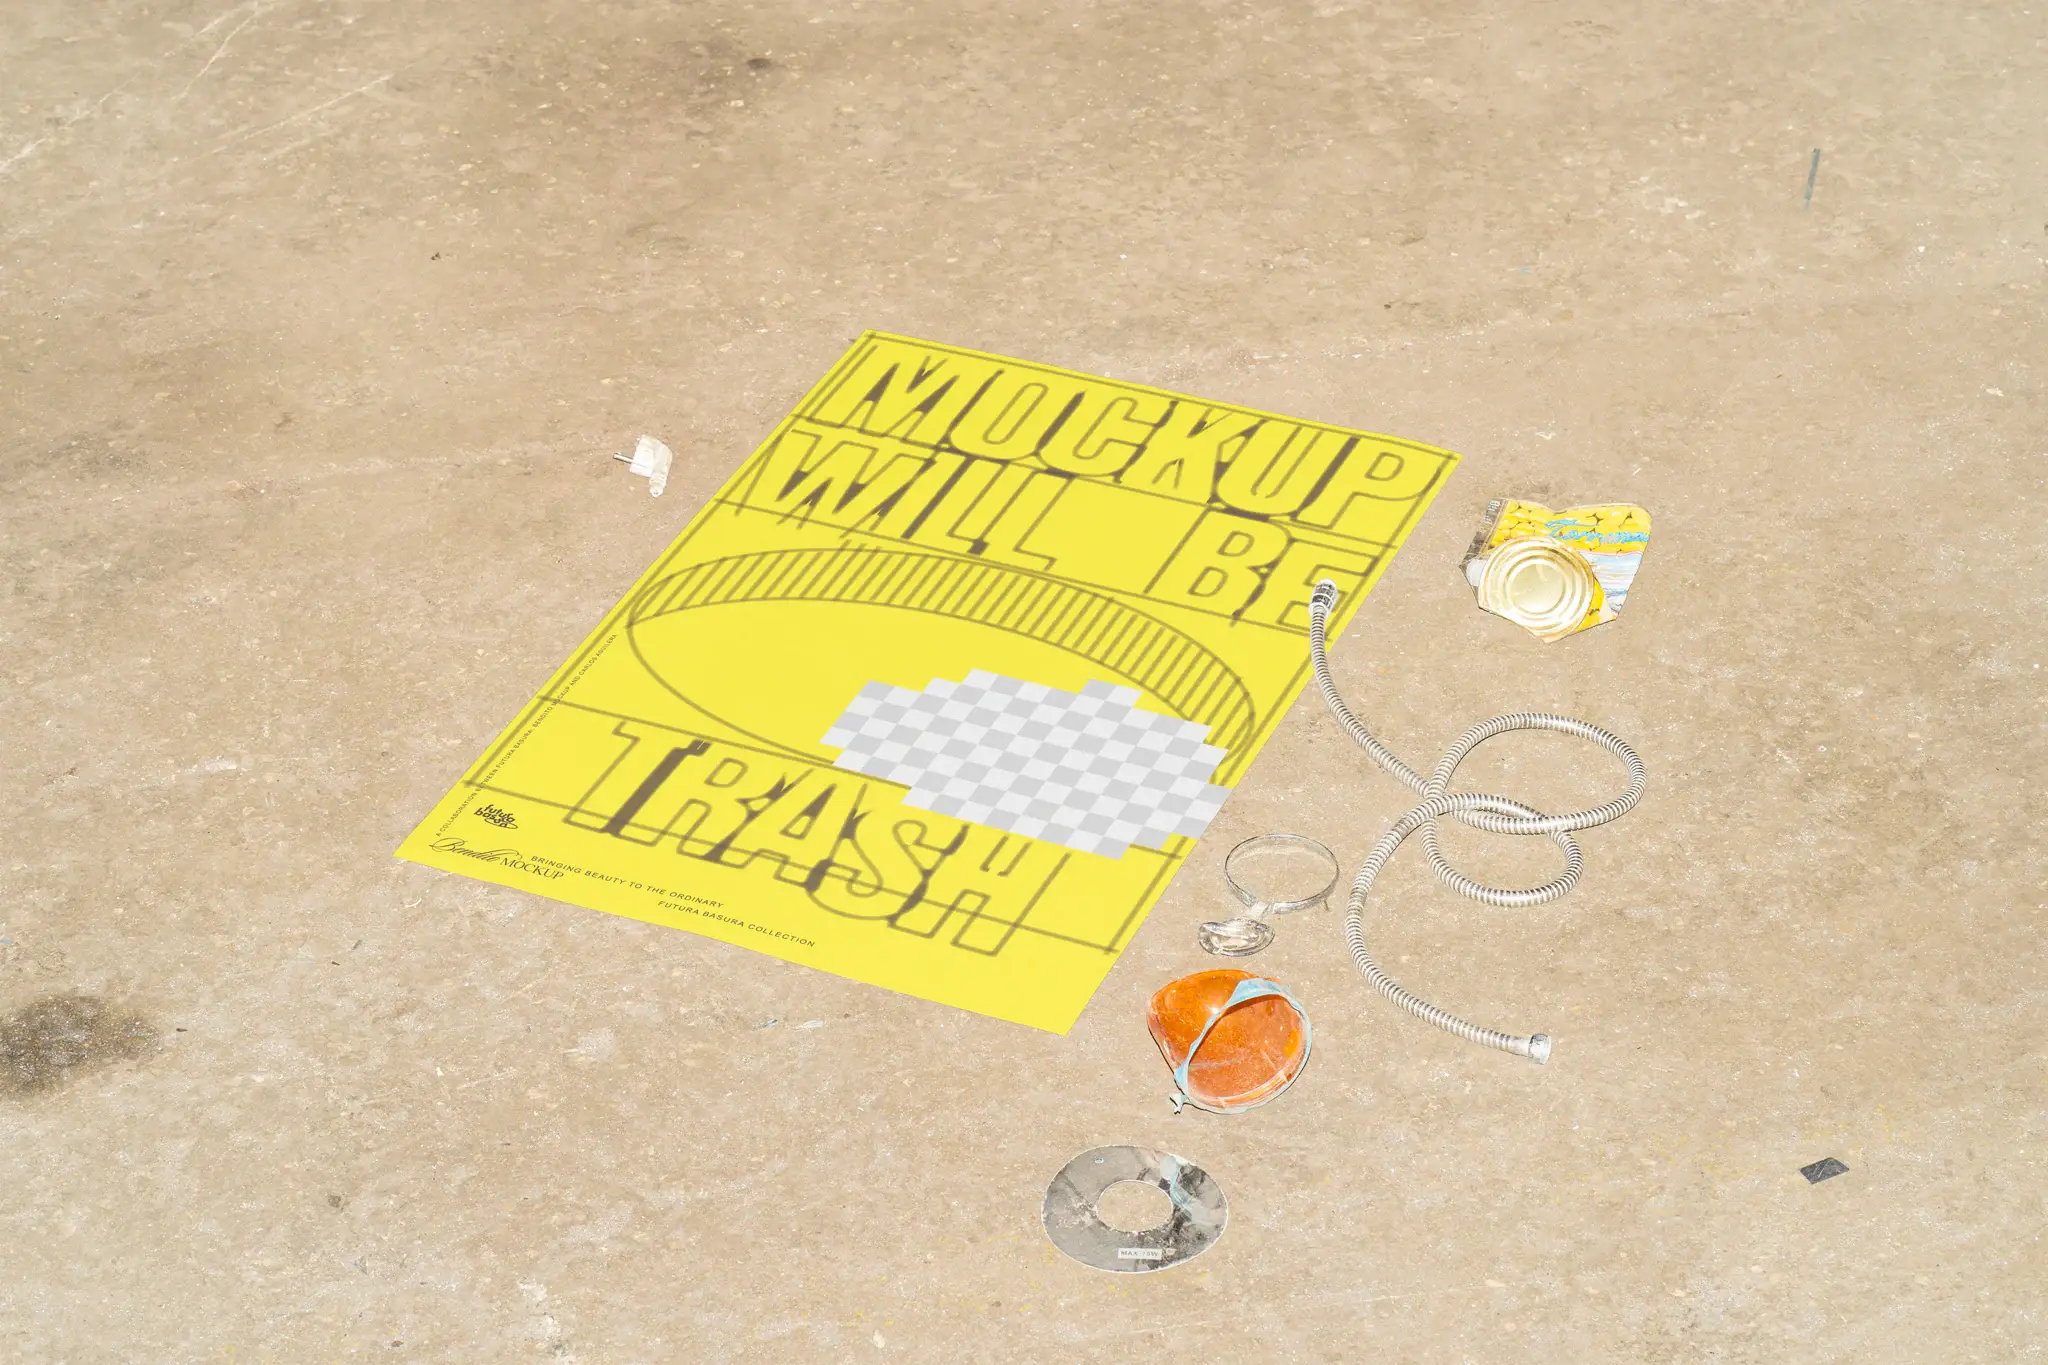 Poster mockup on the ground surrounded by trashy objects